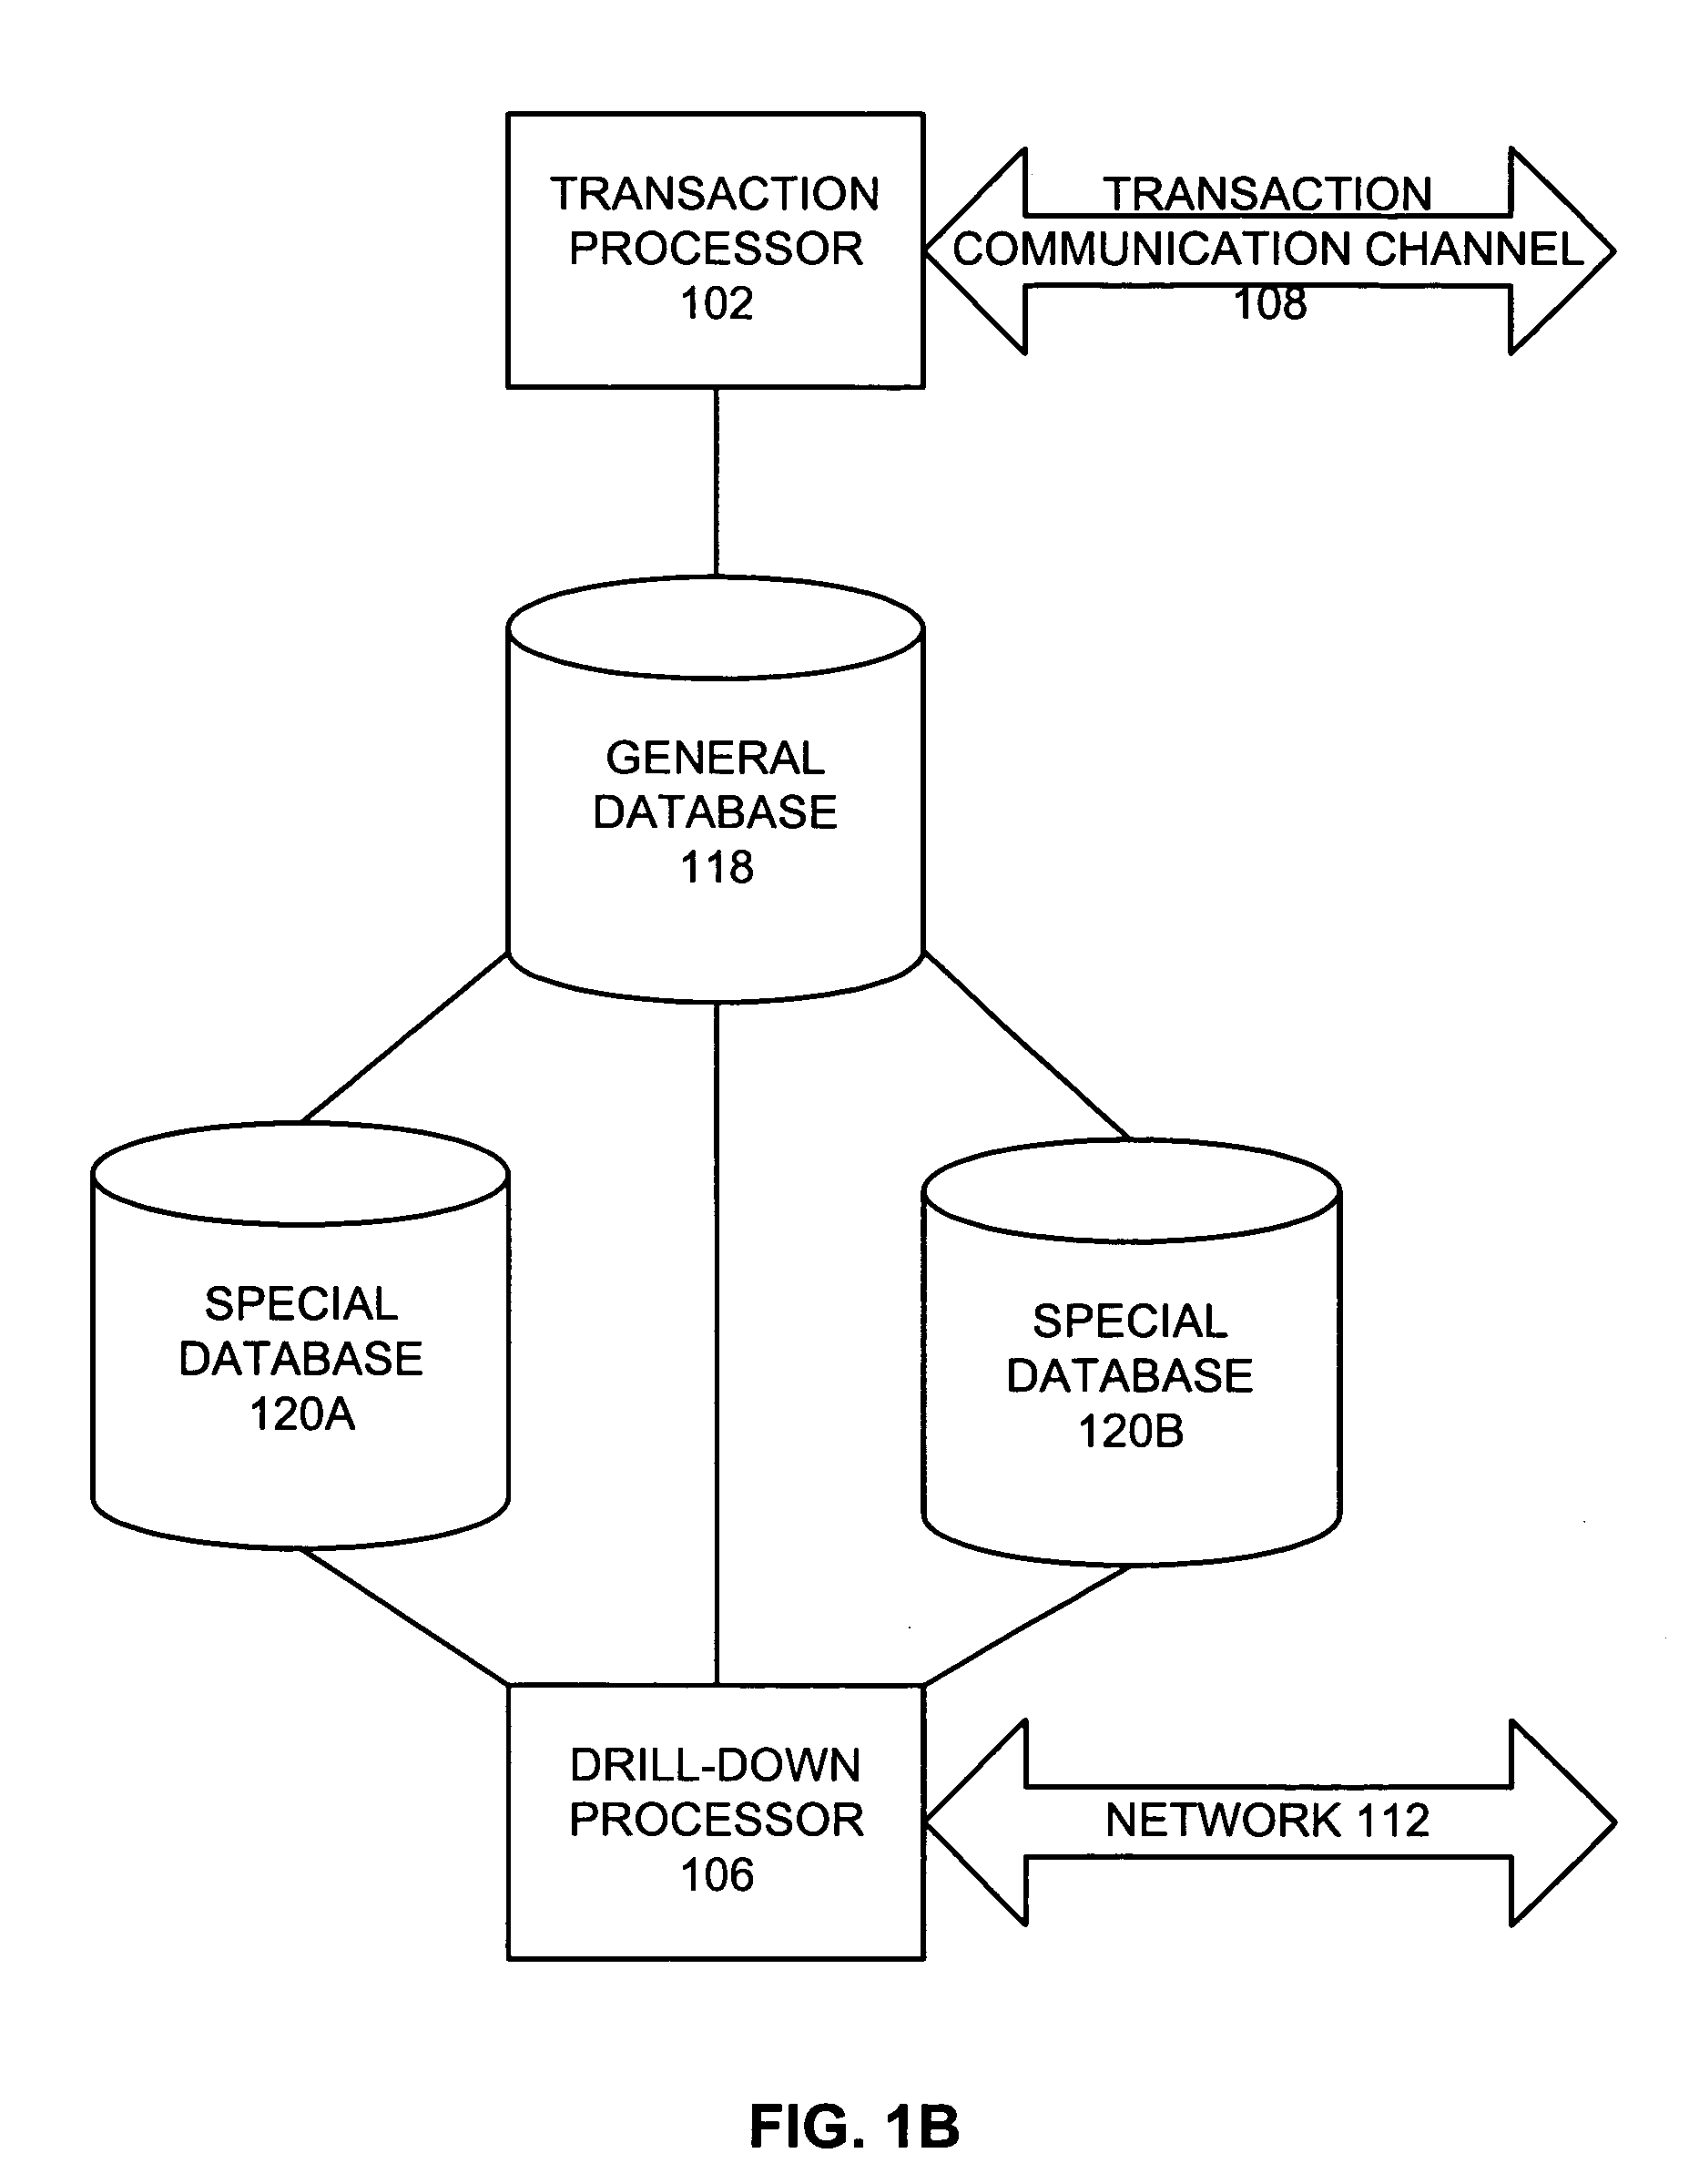 Systems and methods for managing and reporting financial information